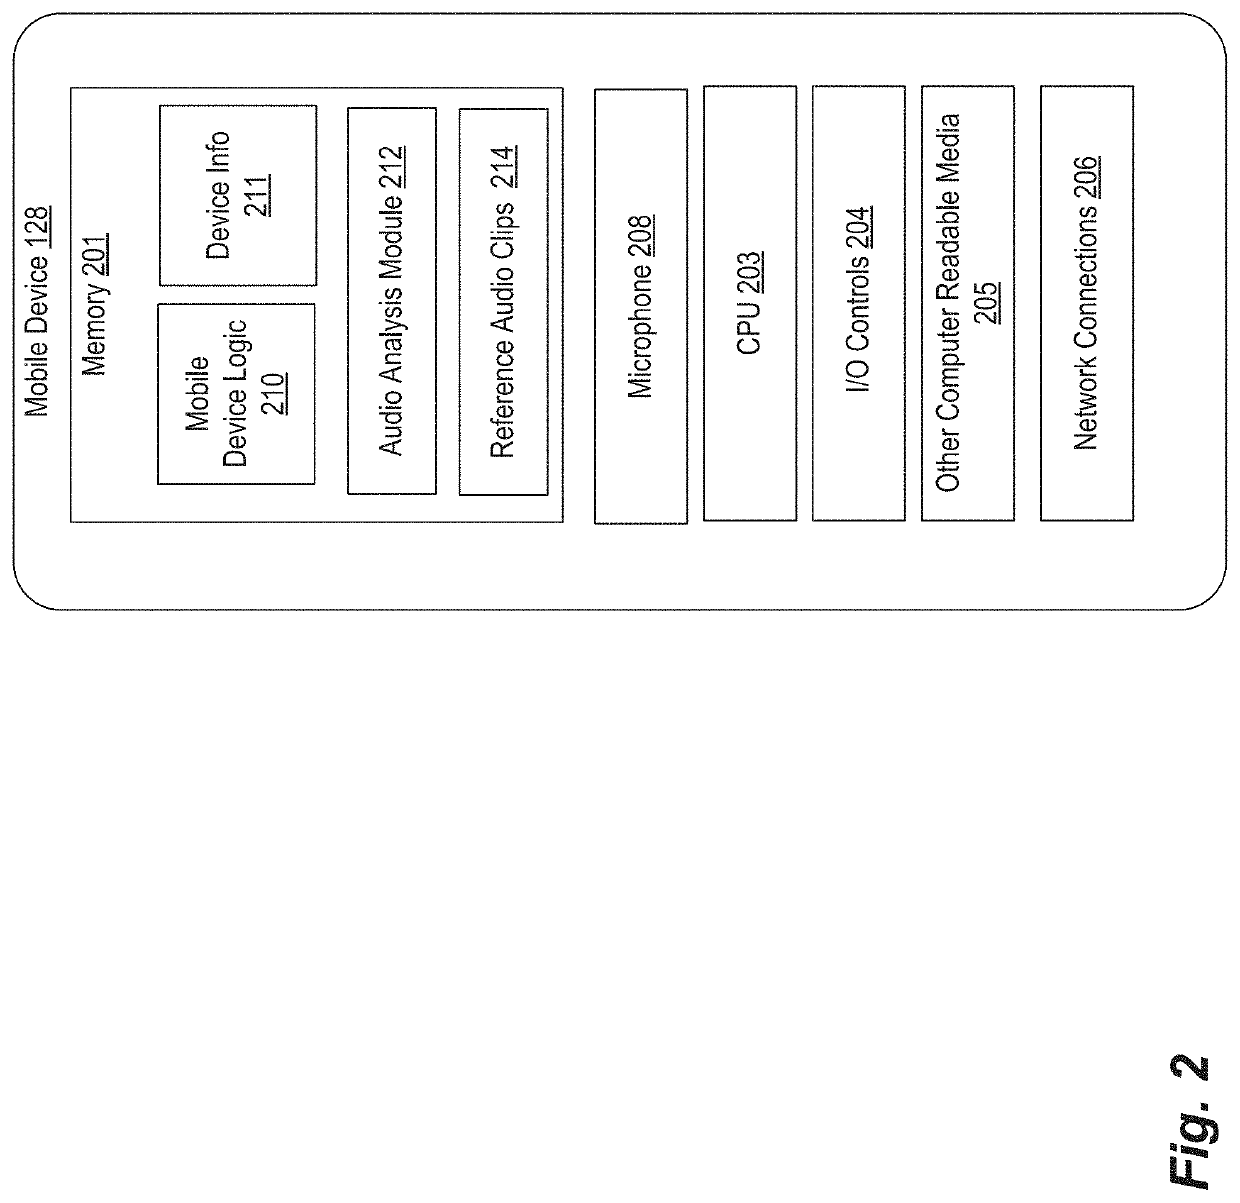 Systems and methods for facilitating configuration of an audio system